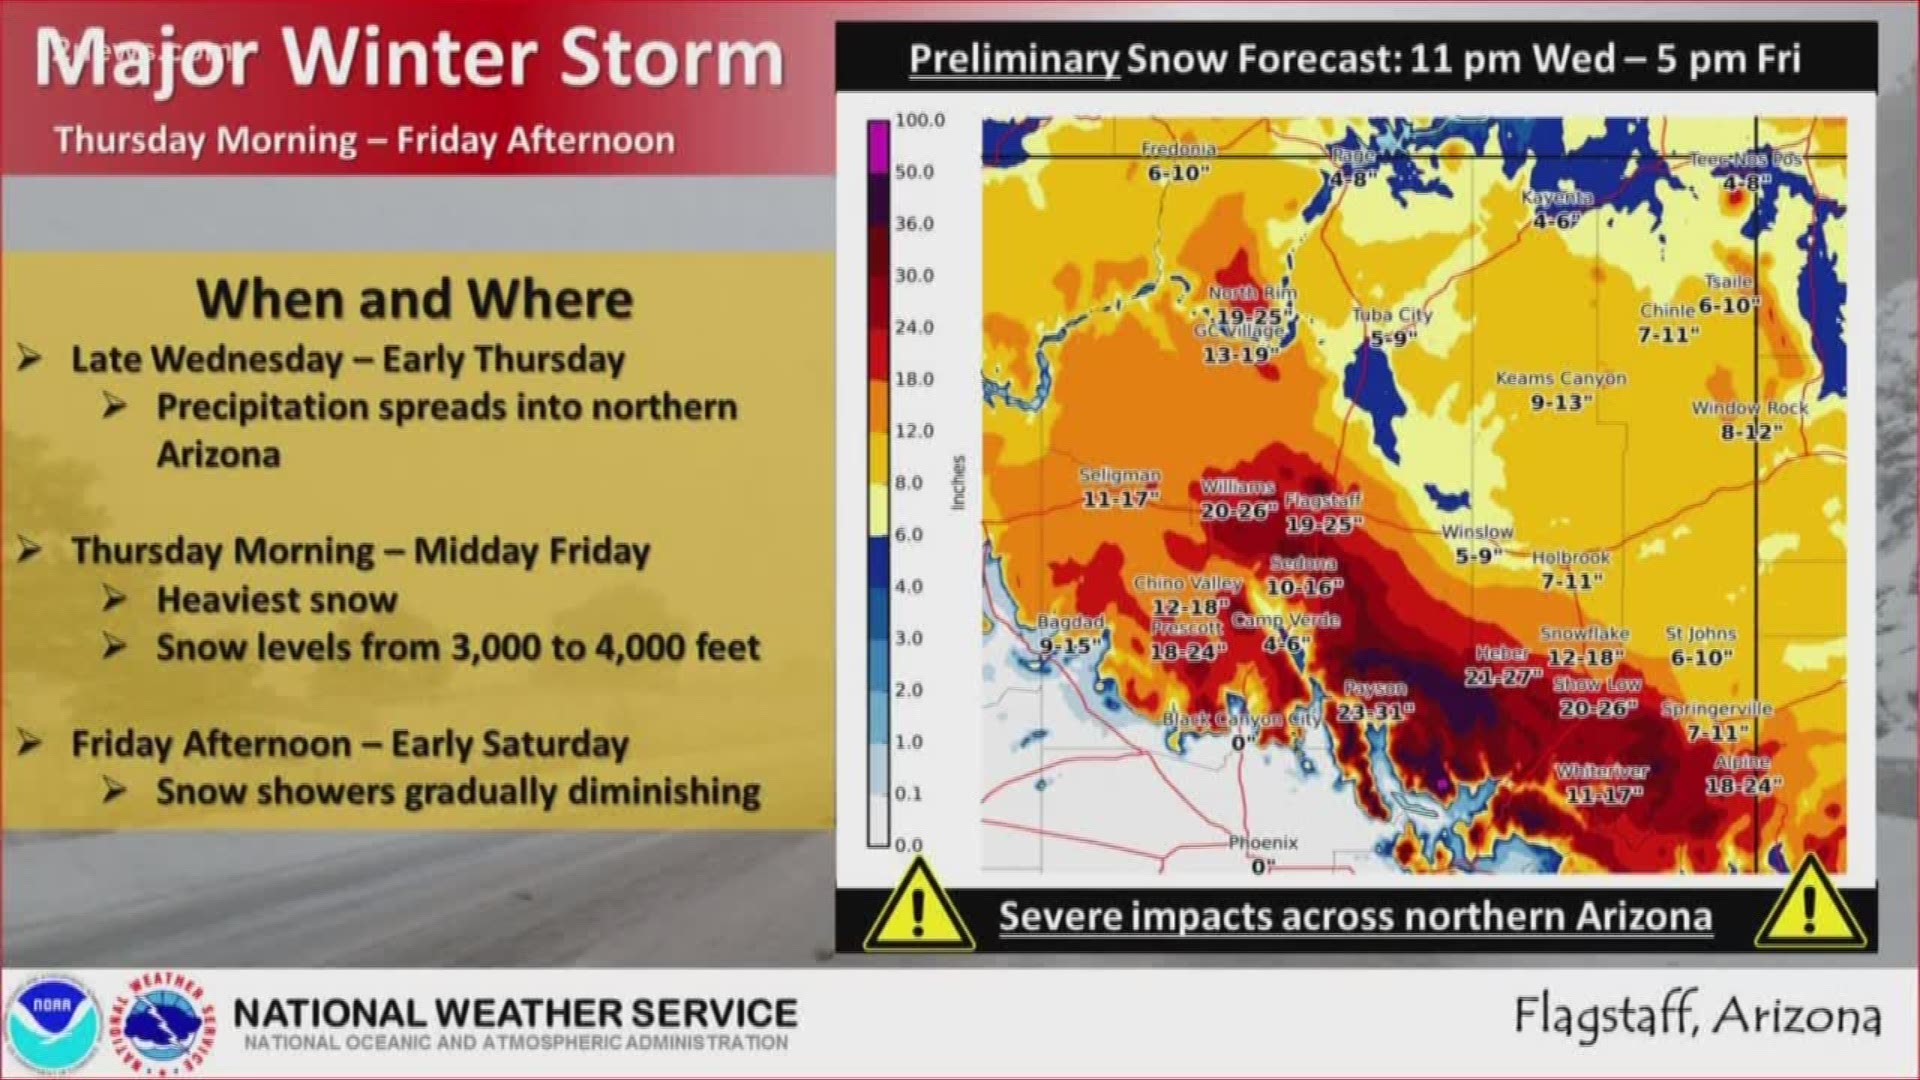 A huge winter storm is heading straight for Arizona. We update you on the forecast and what to expect in the High Country and the Valley over the next 48 hours.